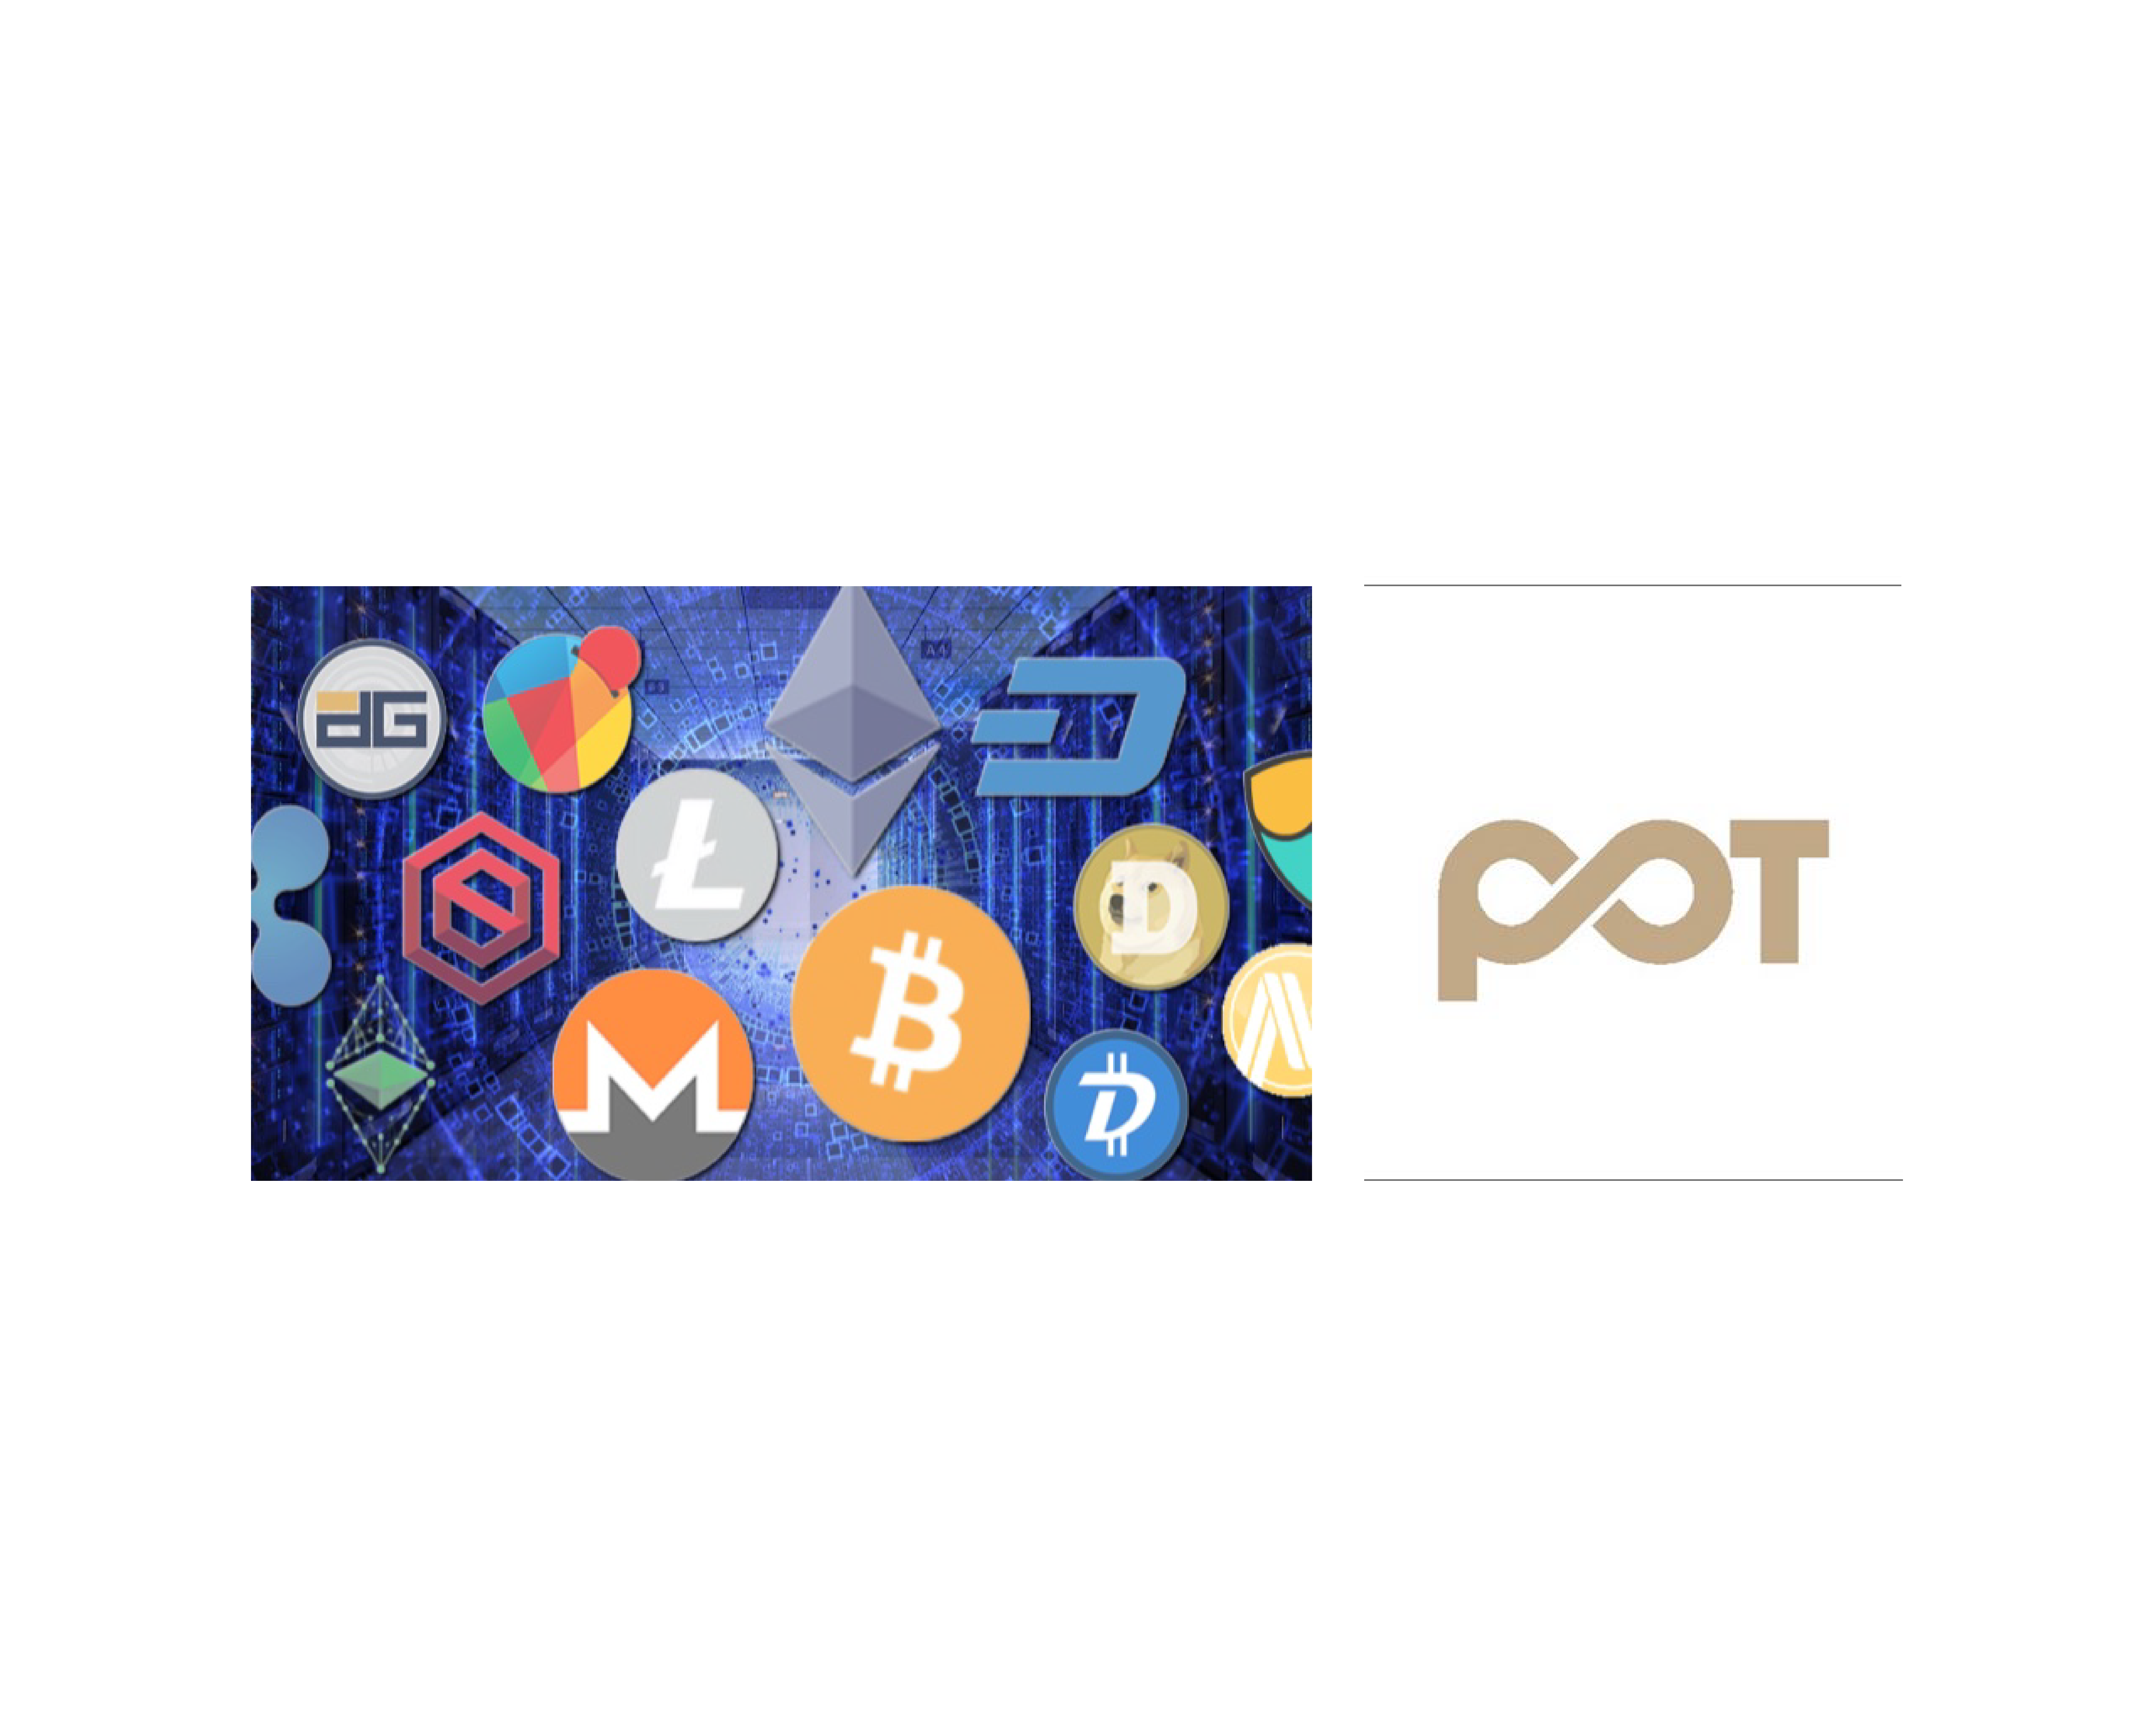 infinitypots now accepts crypto currencies